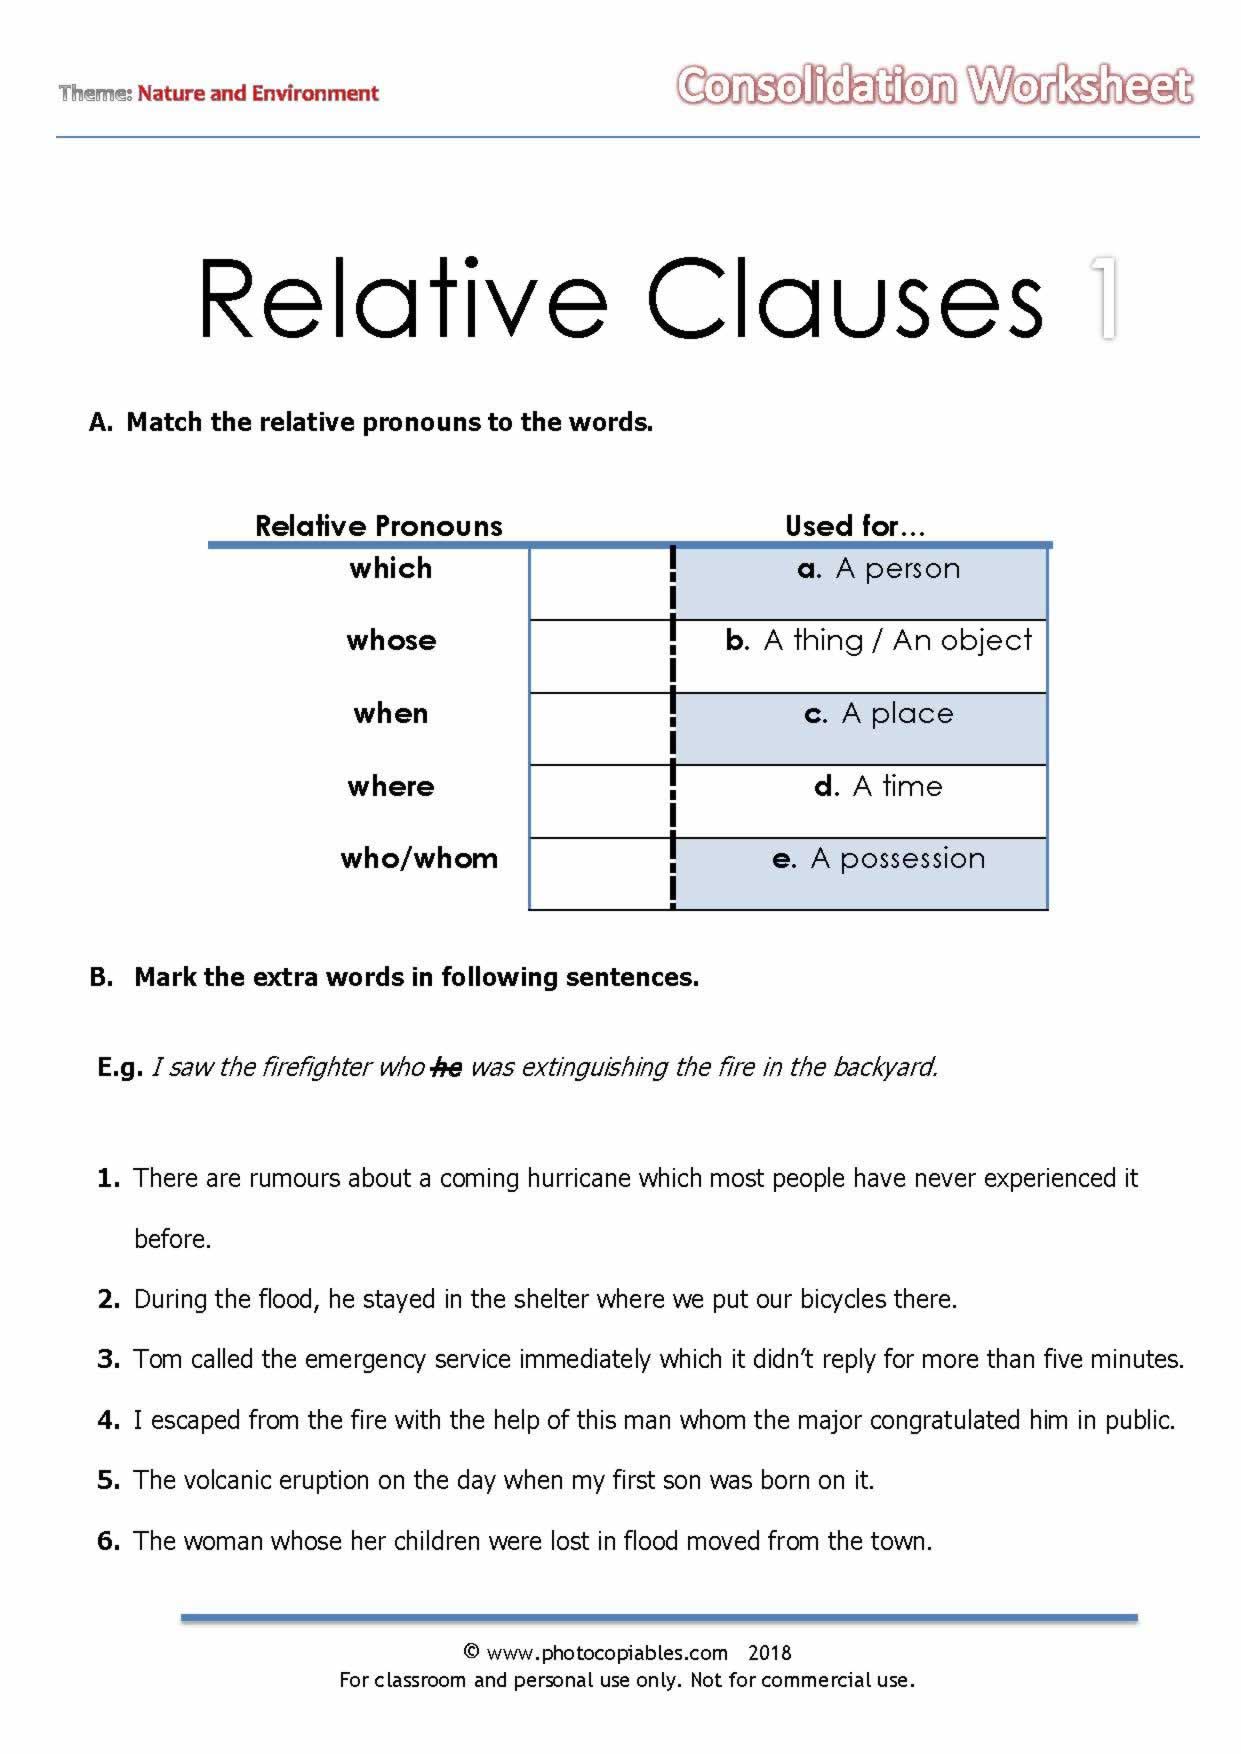 Relative Clauses Worksheet Doc